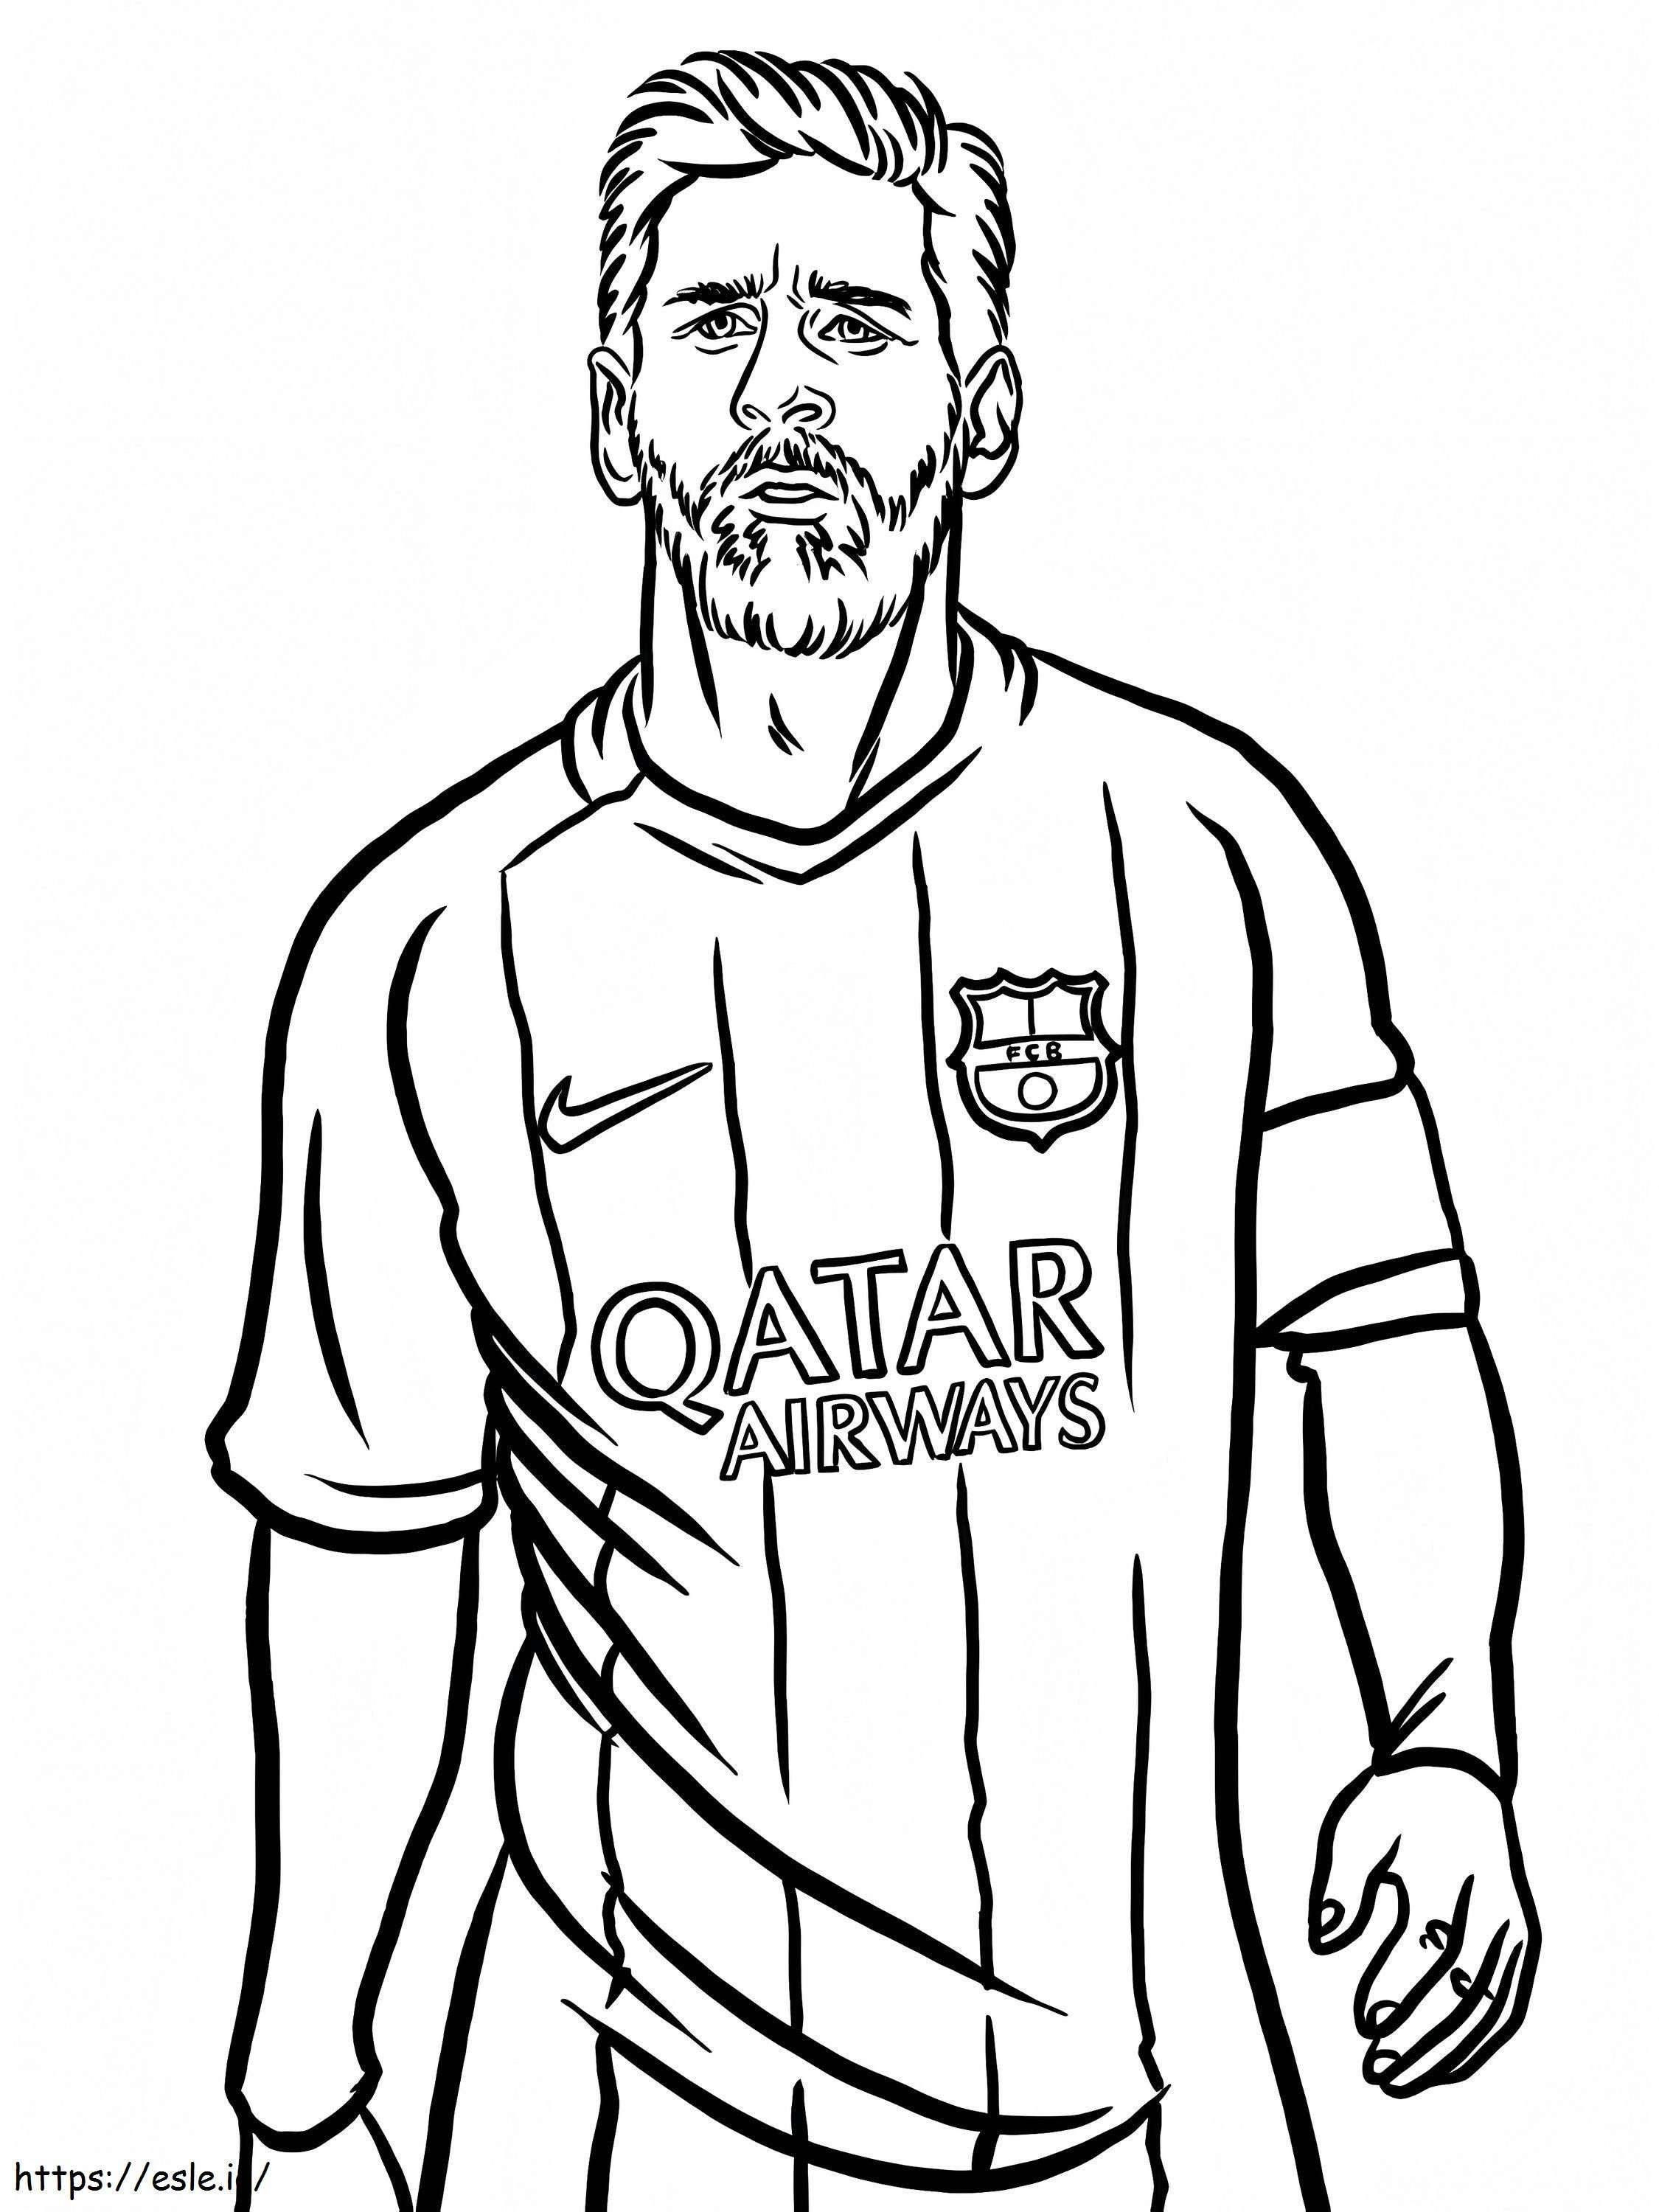 Lionel Messi 3 coloring page